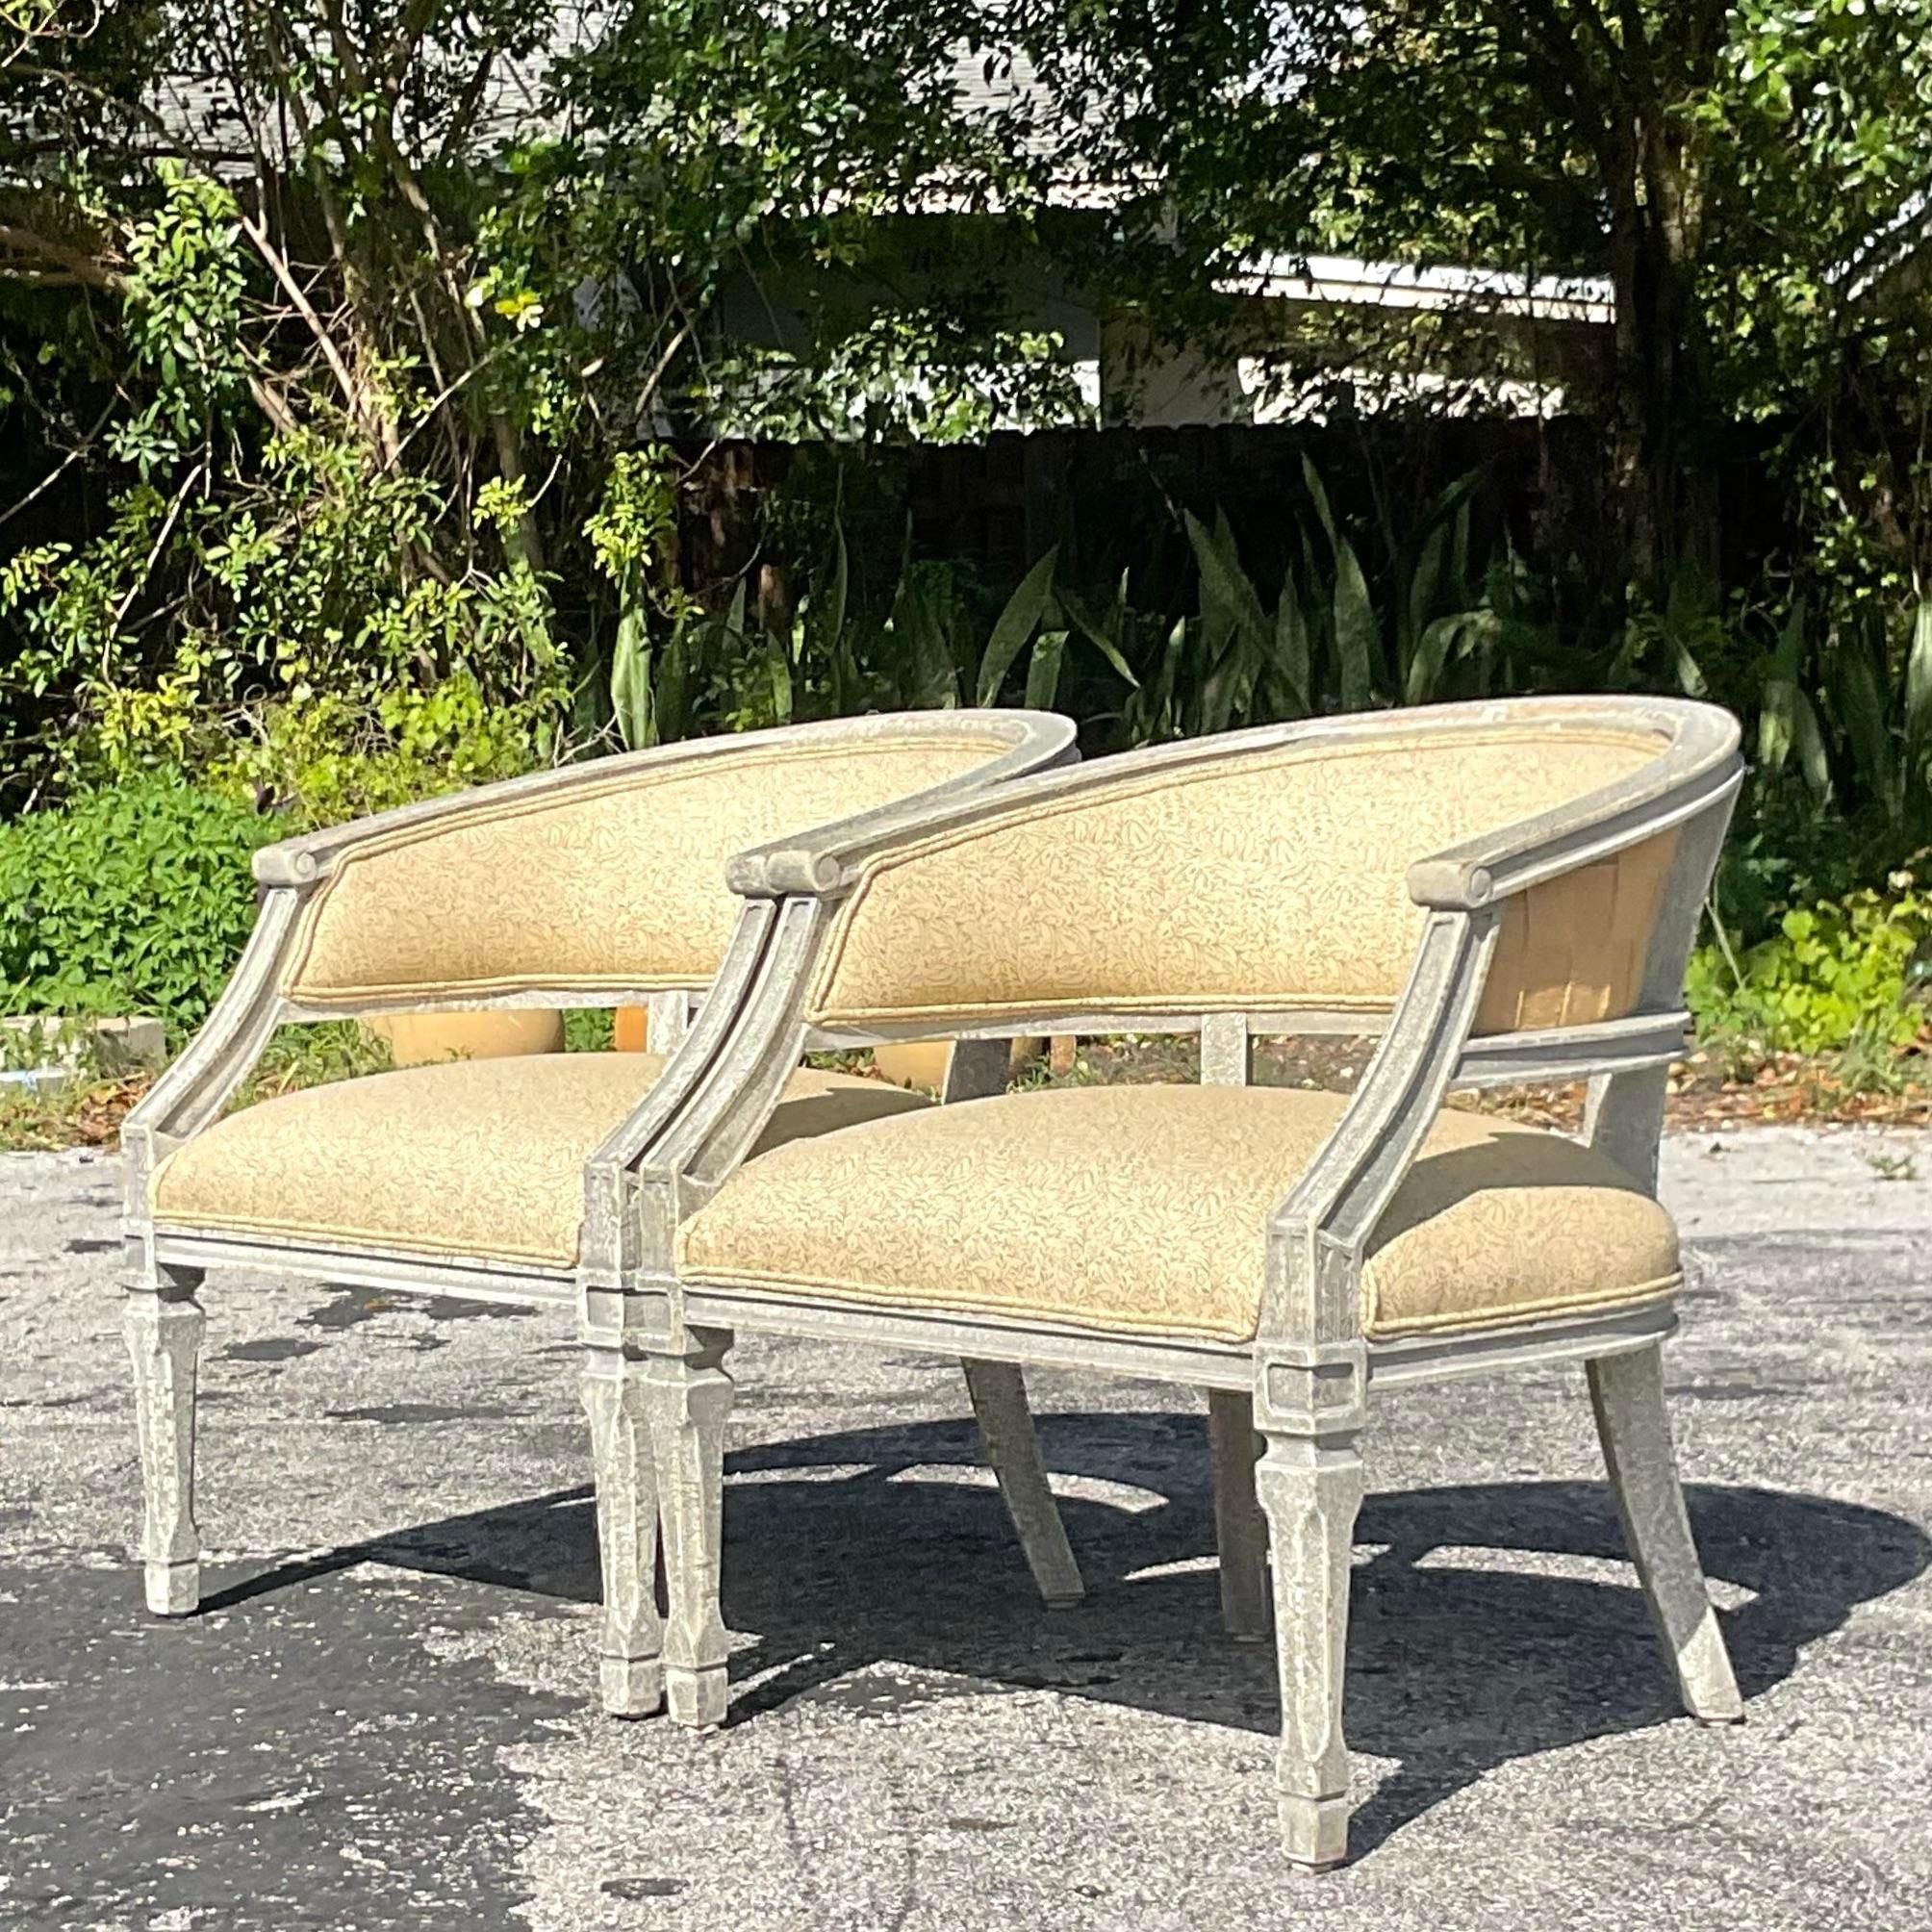 American Vintage Gustavian Washed Barrel Chairs - a Pair For Sale